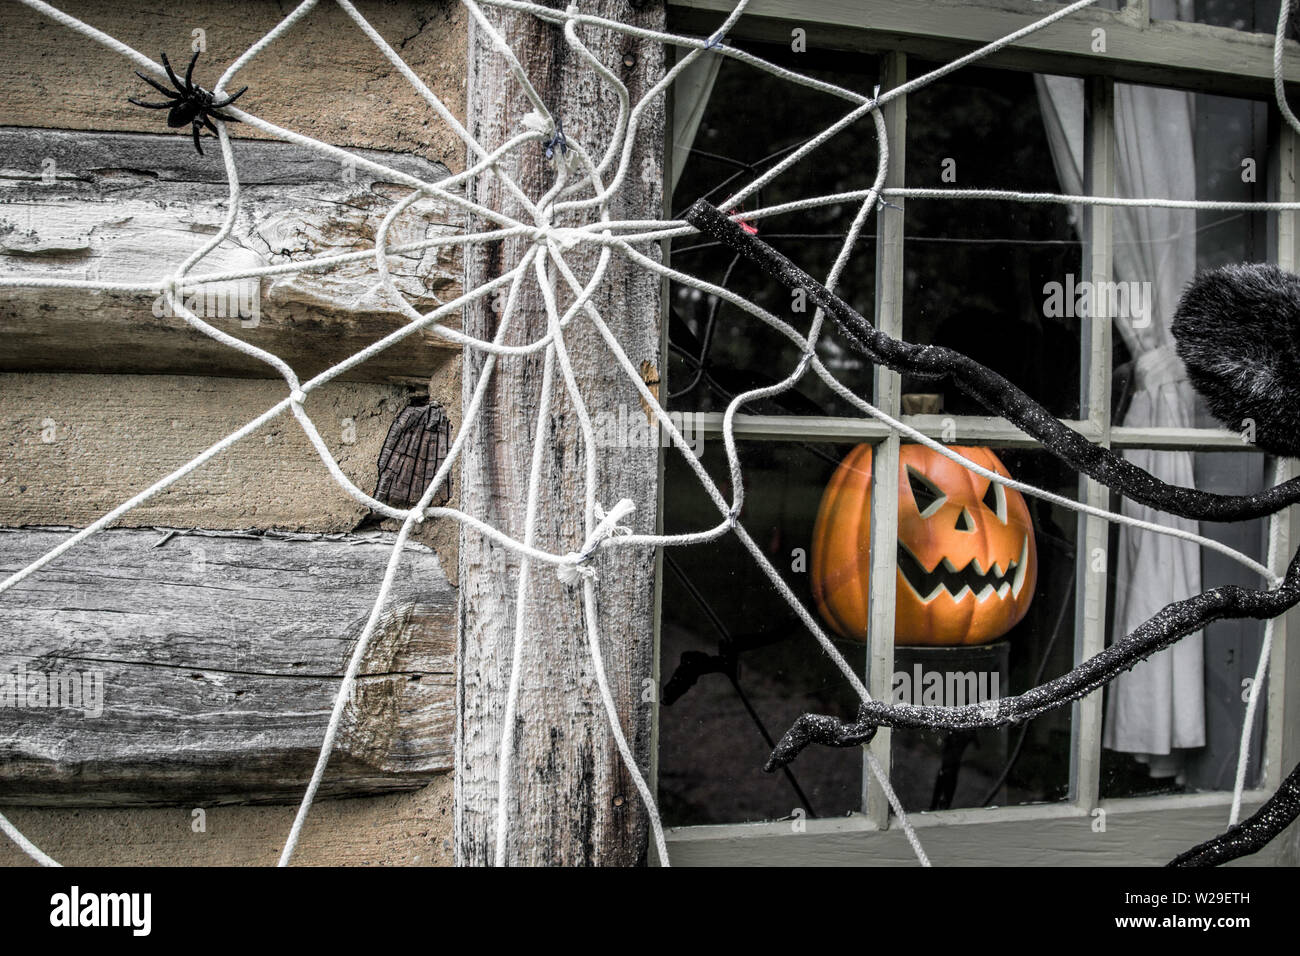 Halloween Background. Jack O Lantern and spider web decorations on exterior wall of home. Stock Photo